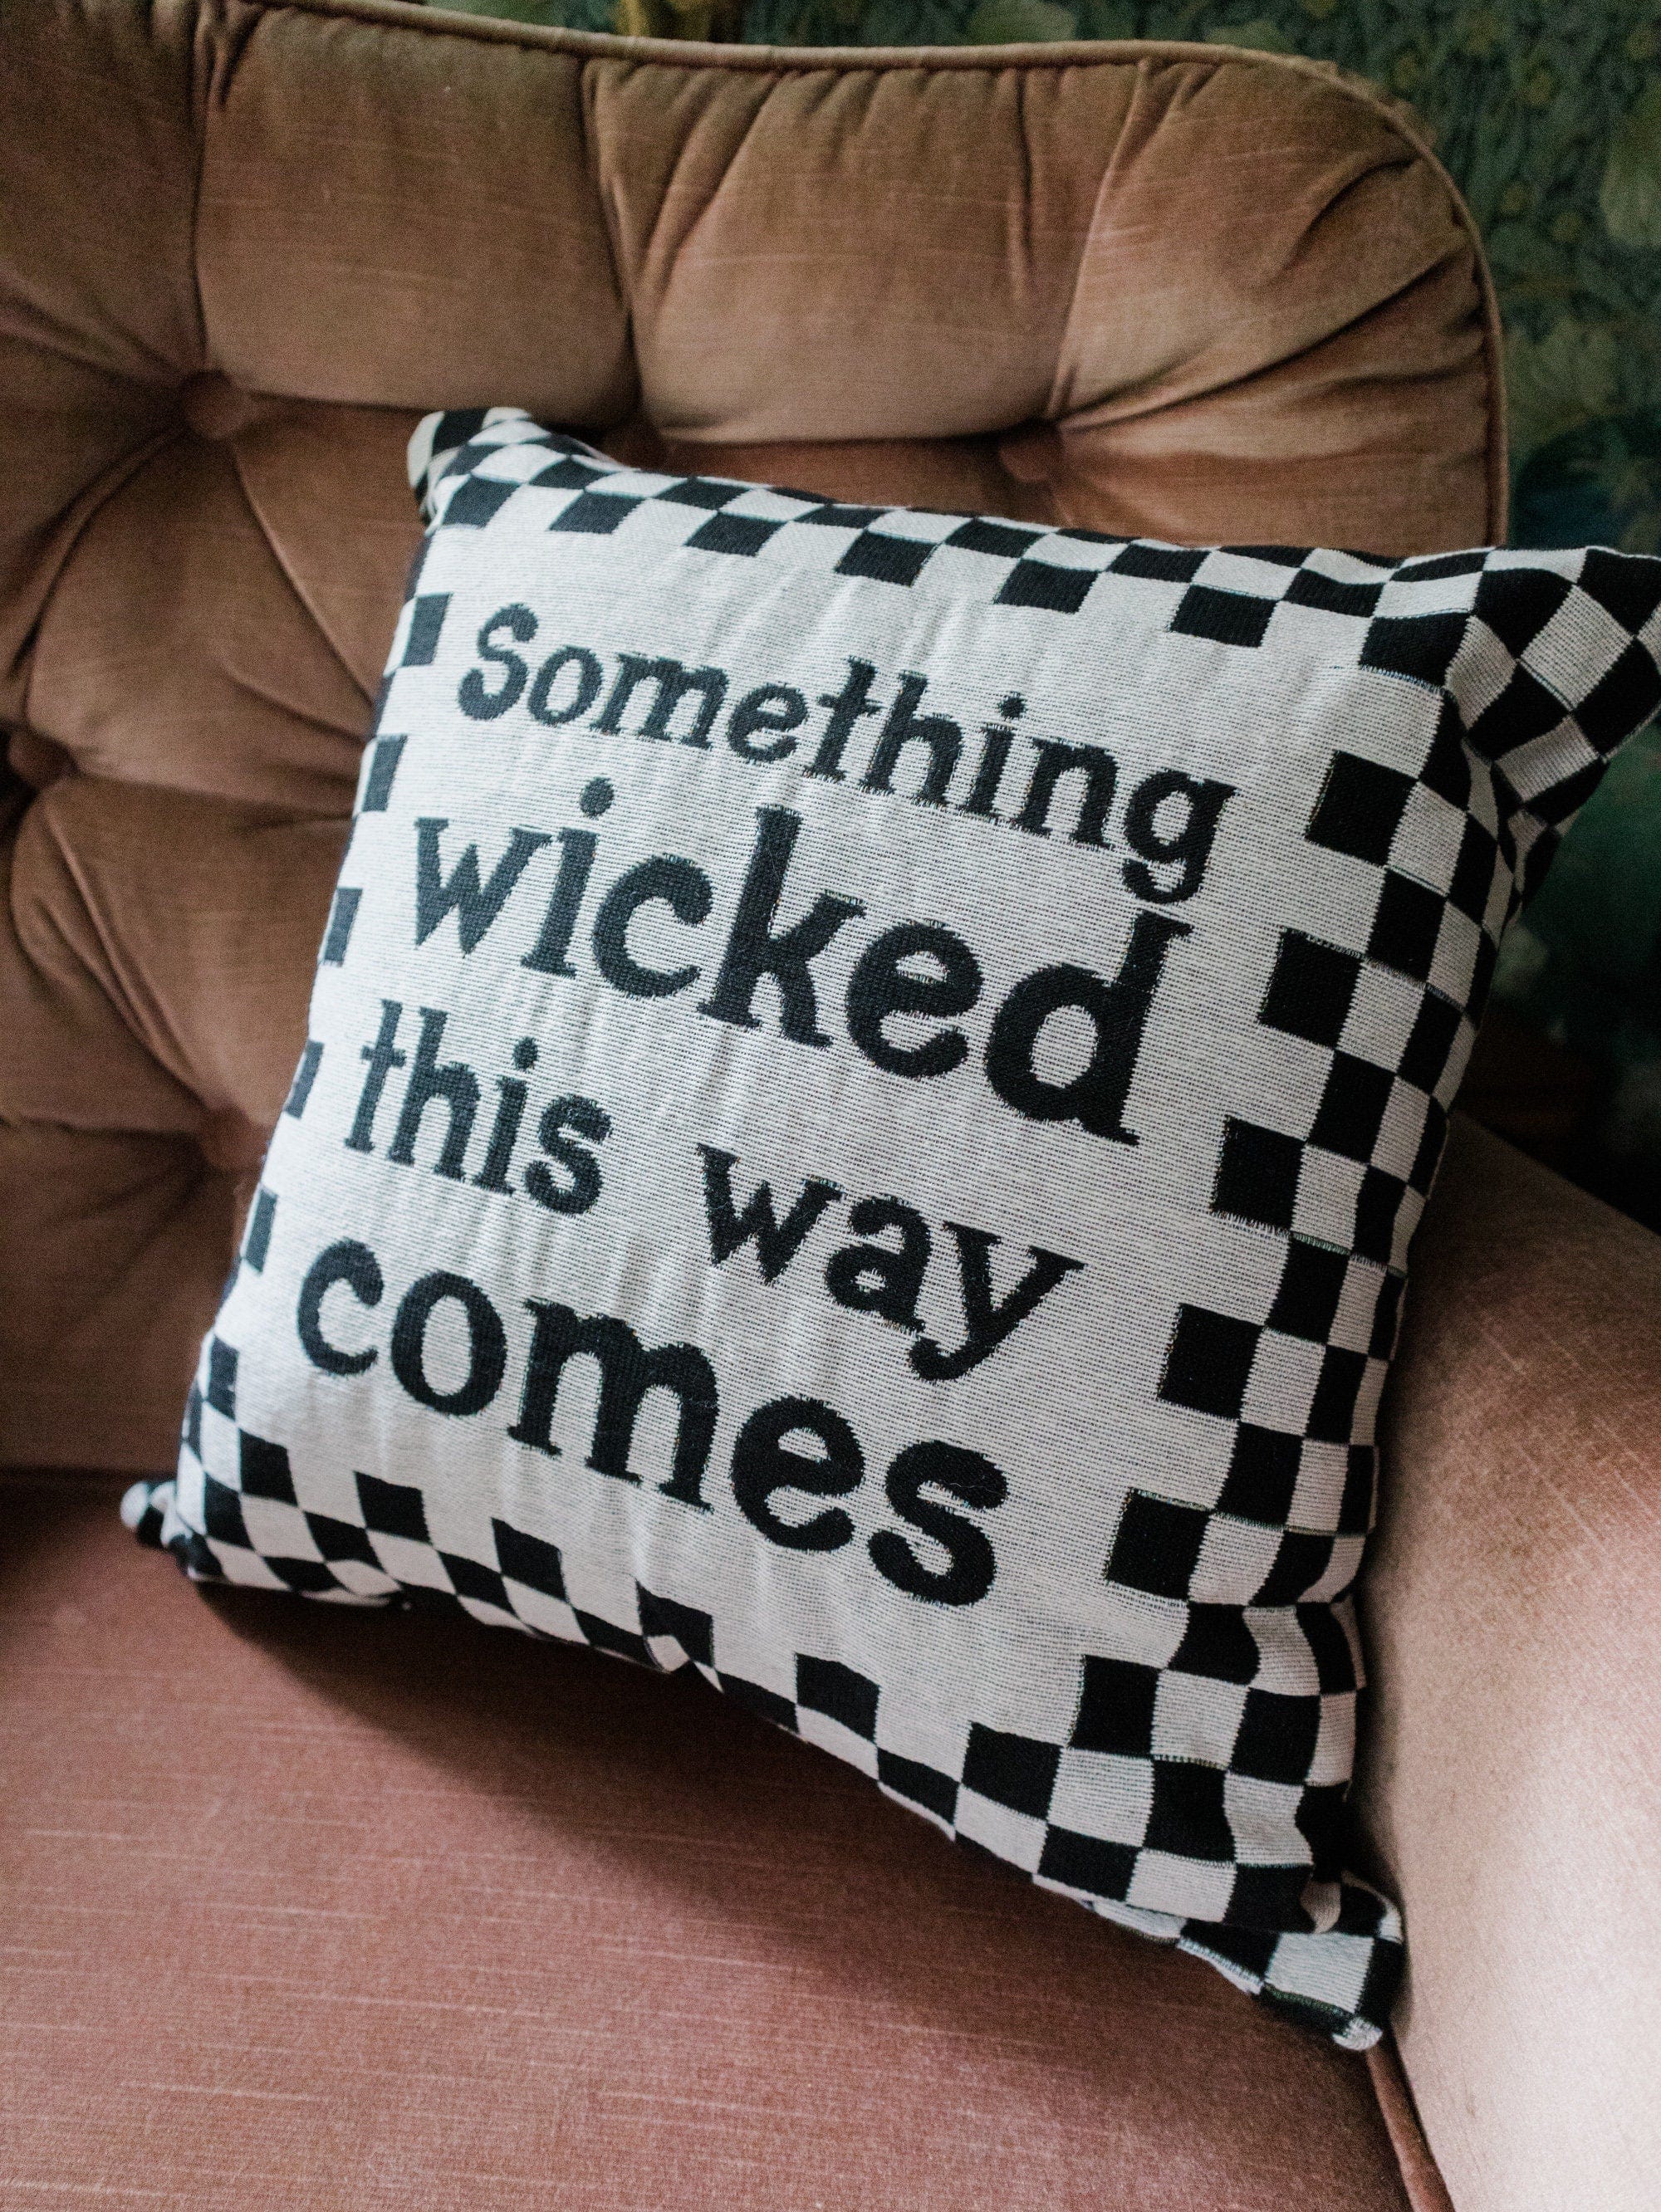 Halloween Pillow: Something Wicked